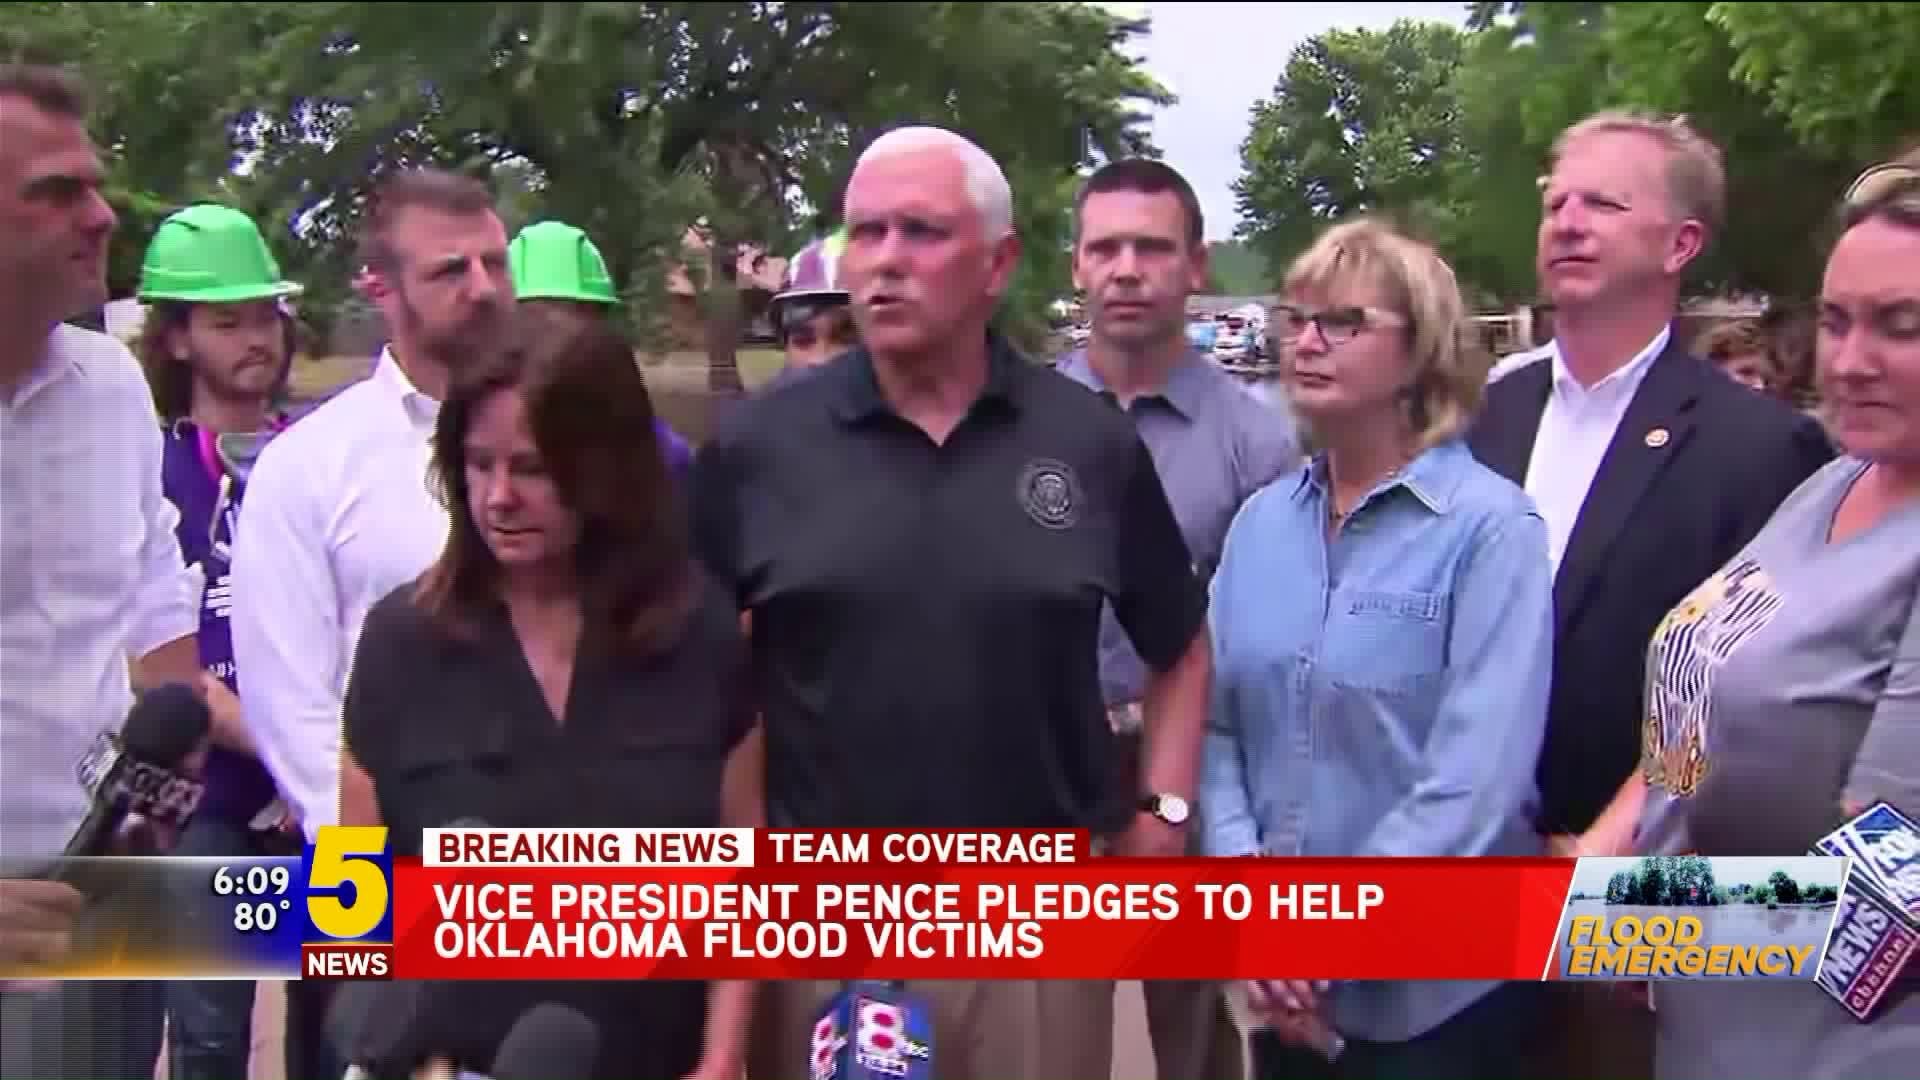 Mike Pence in Oklahoma